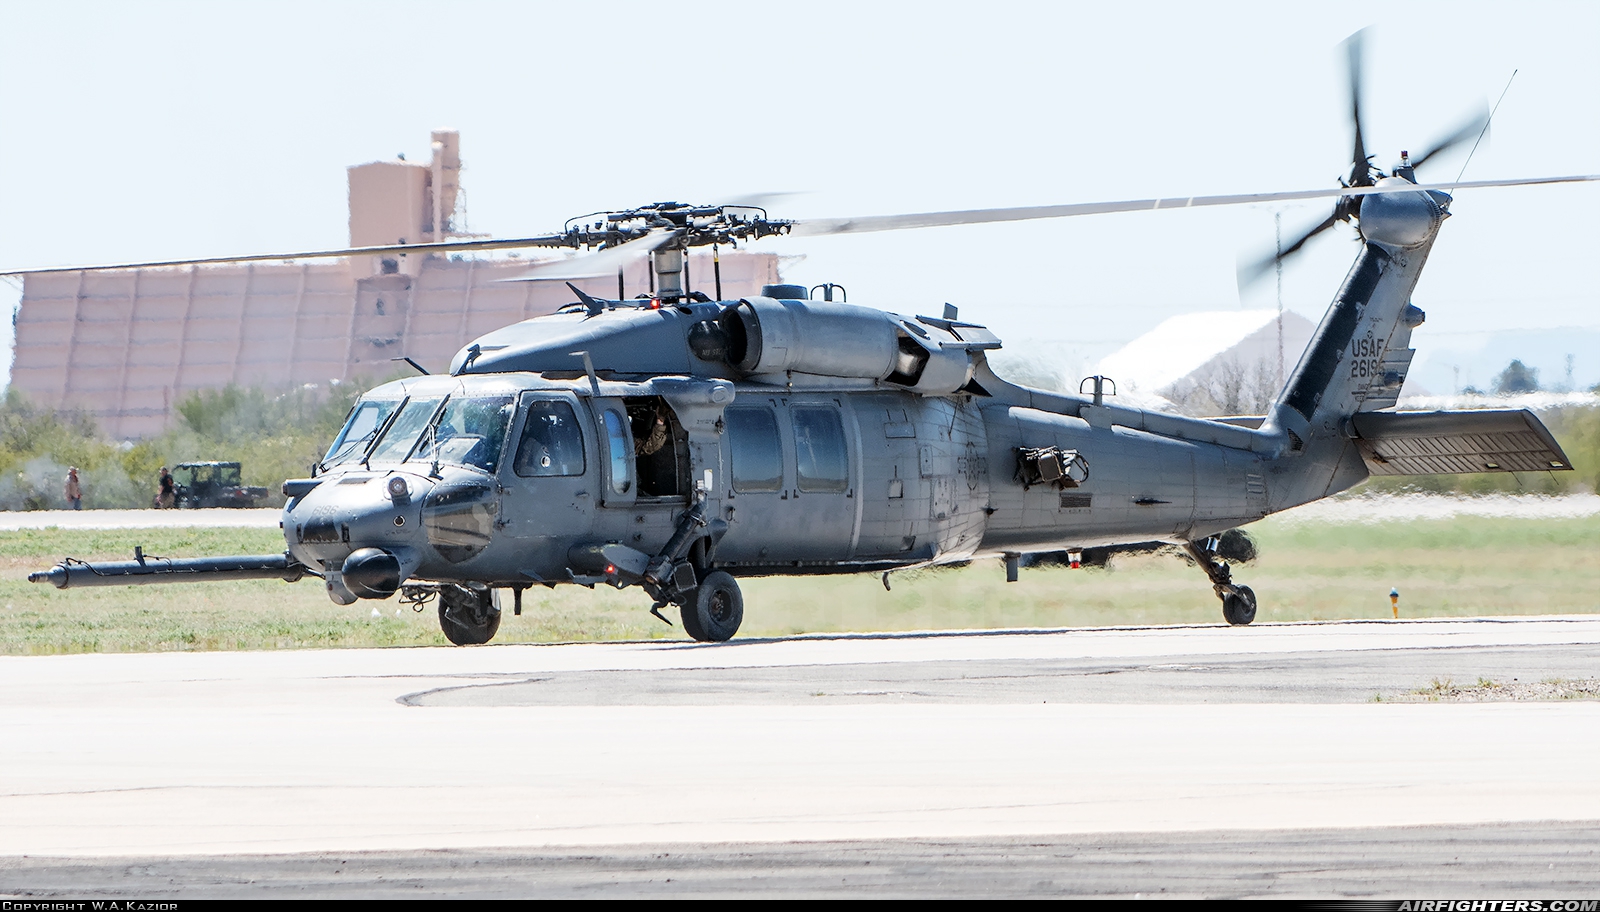 USA - Air Force Sikorsky HH-60G Pave Hawk (S-70A) 89-26196 at Tucson - Davis-Monthan AFB (DMA / KDMA), USA